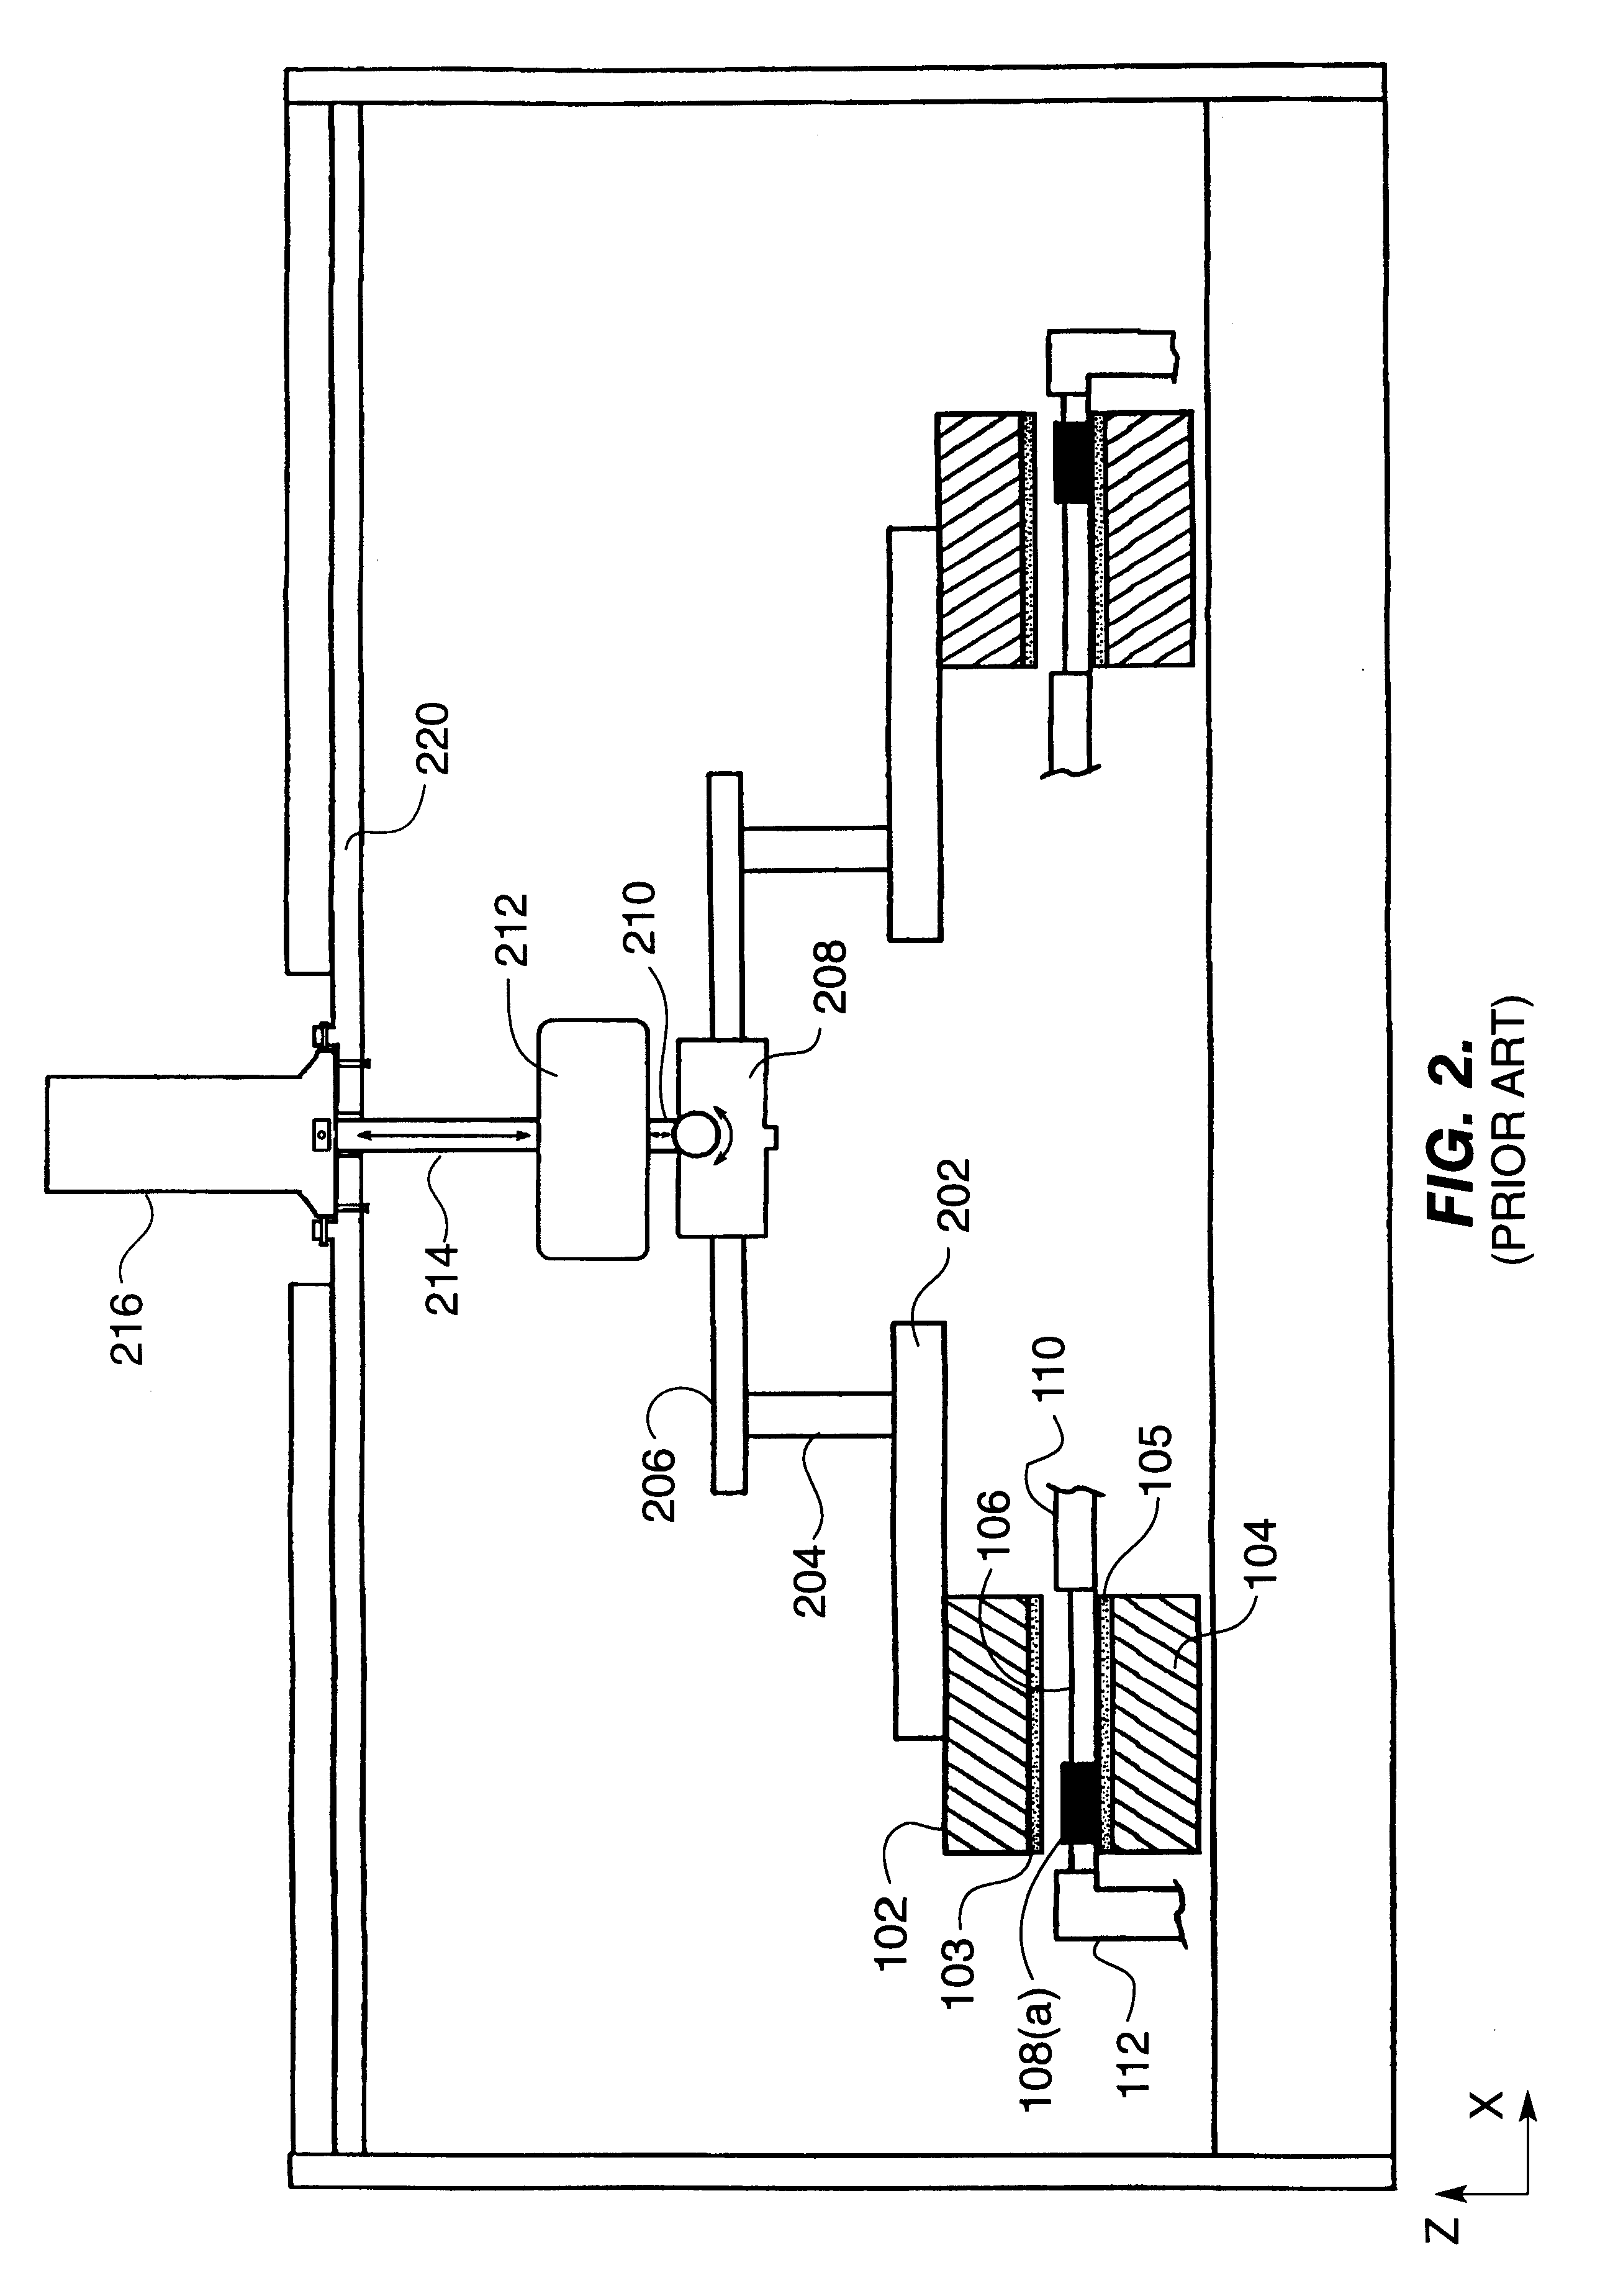 Apparatus for polishing using improved plate supports